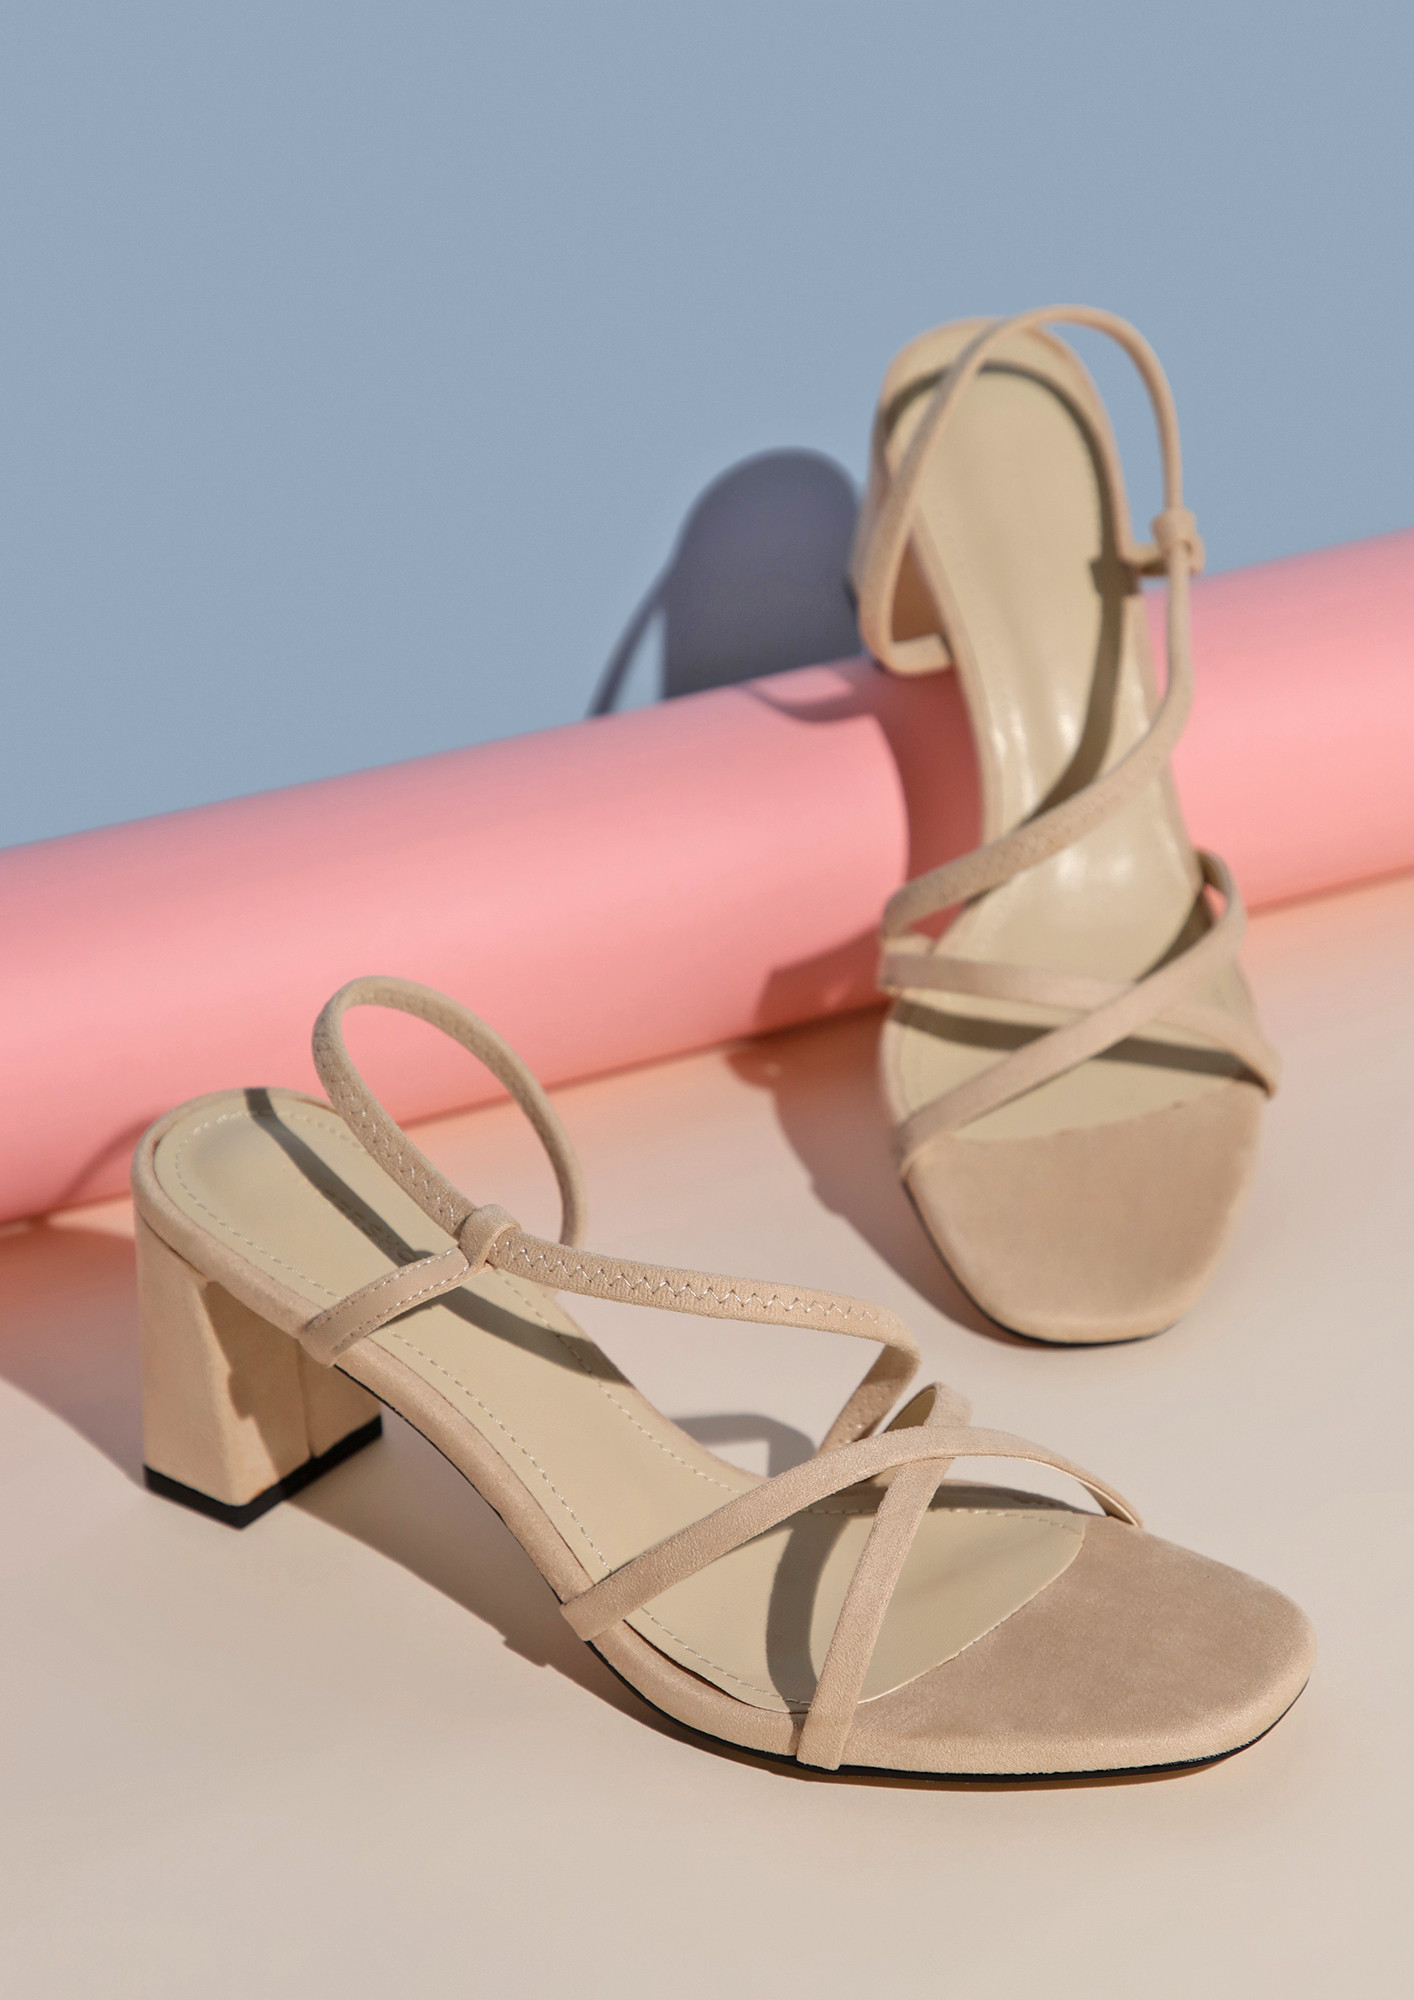 ABSTRACT SELF BEIGE SANDALS